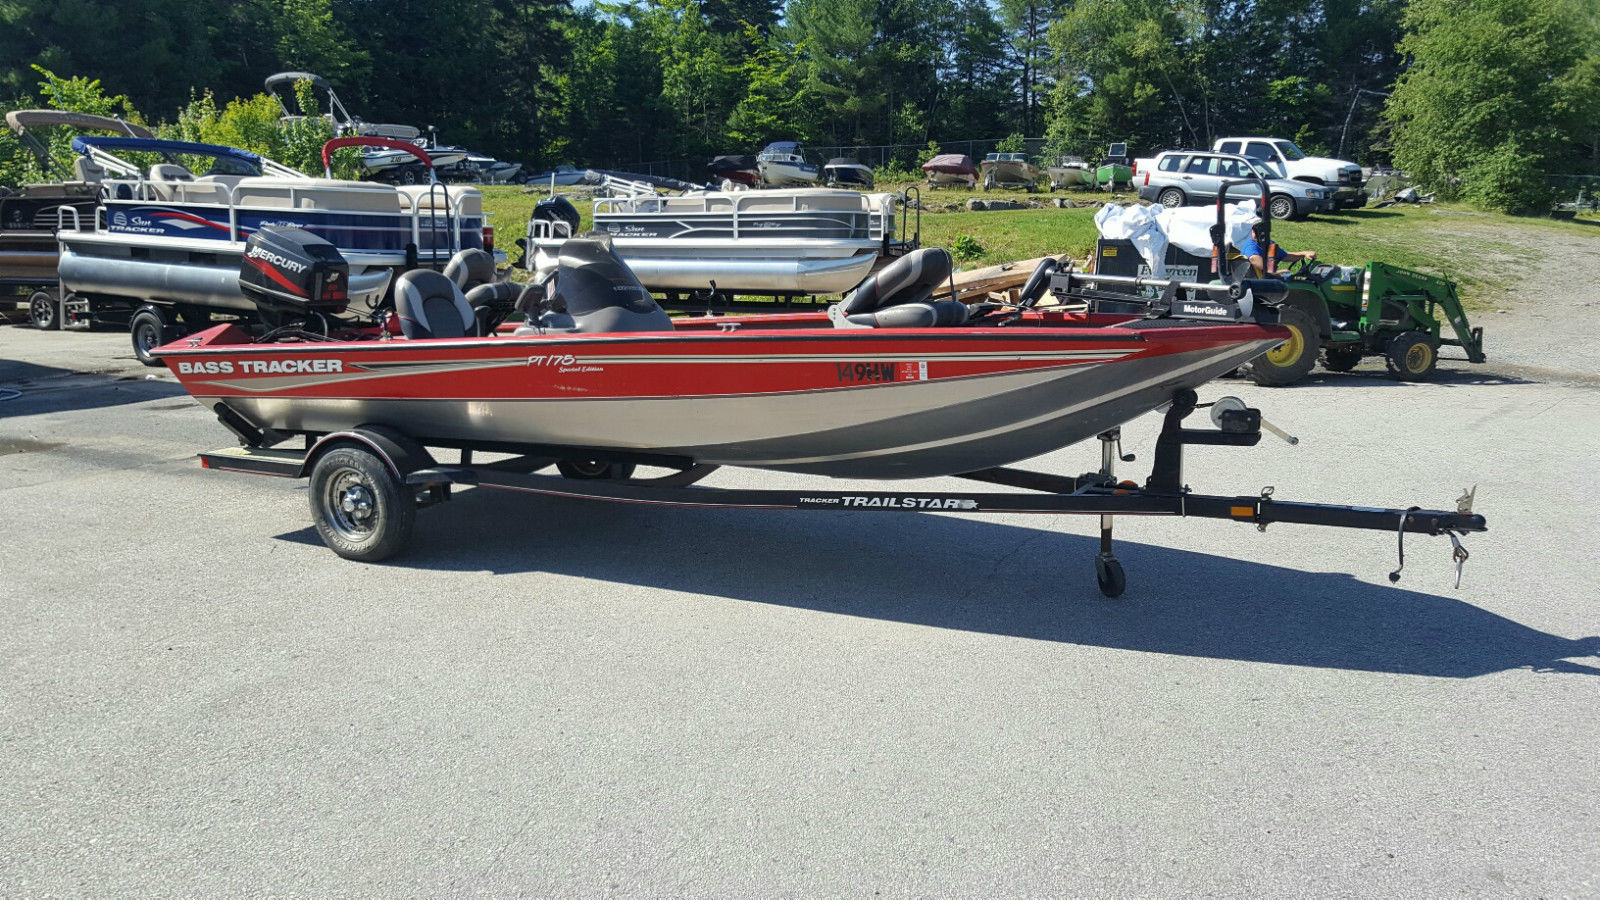 Tracker 2005 for sale for $1,000 - Boats-from-USA.com